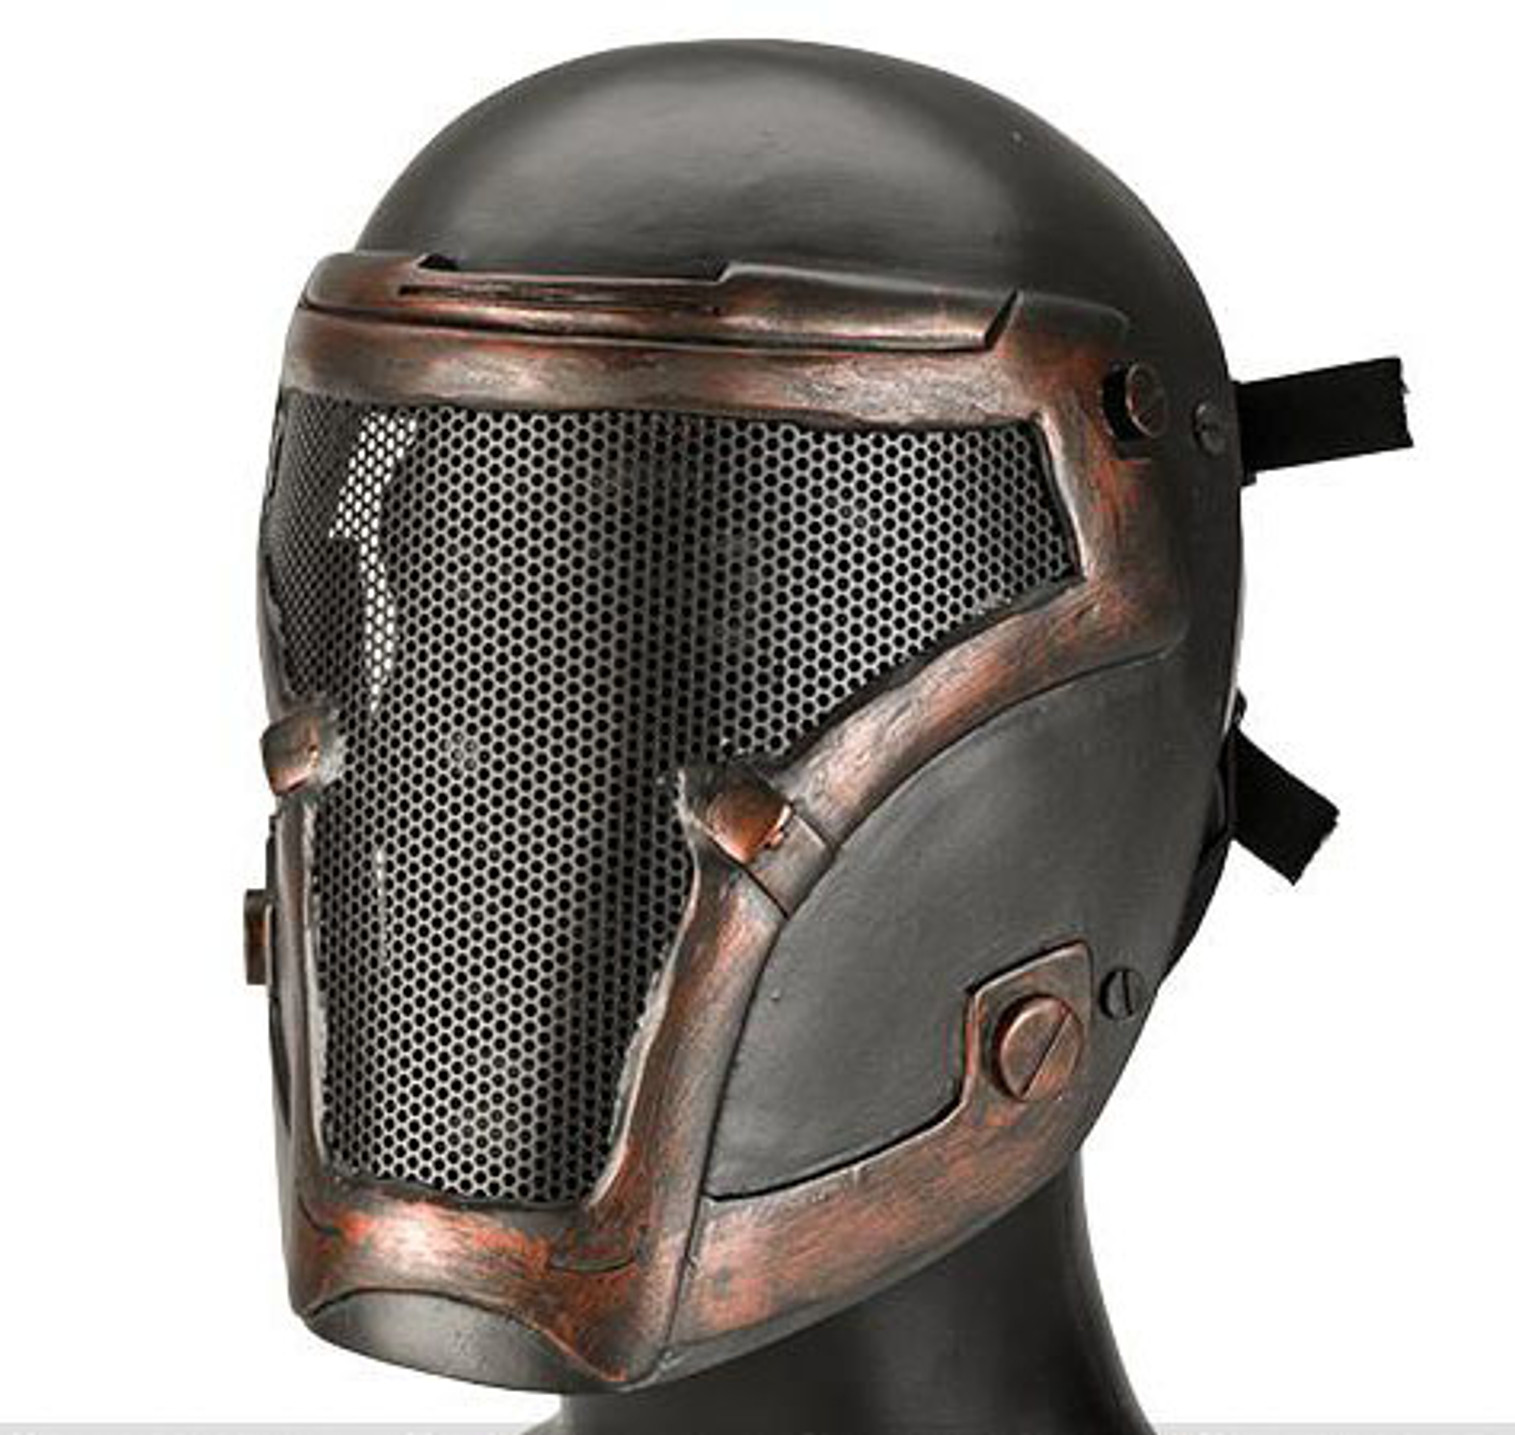 Emerson Wire Mesh "Bio-Chemical Soldier" Face Mask - Rust Bronze